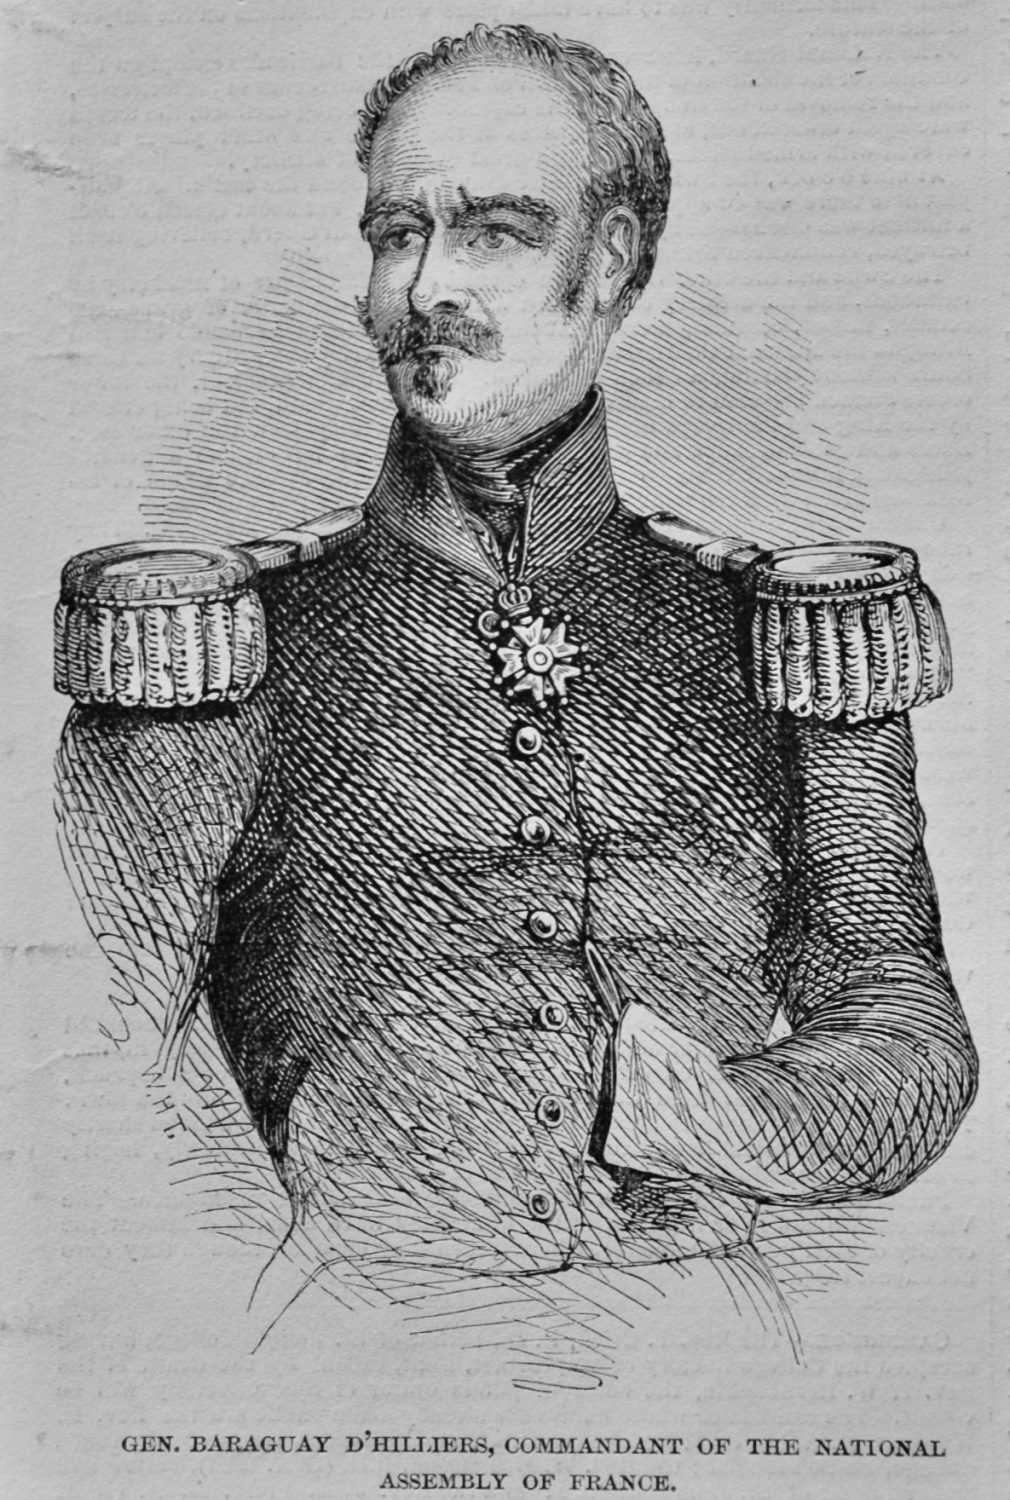 General Baraguay D'Hilliers, Commandant of the National Assembly of France.